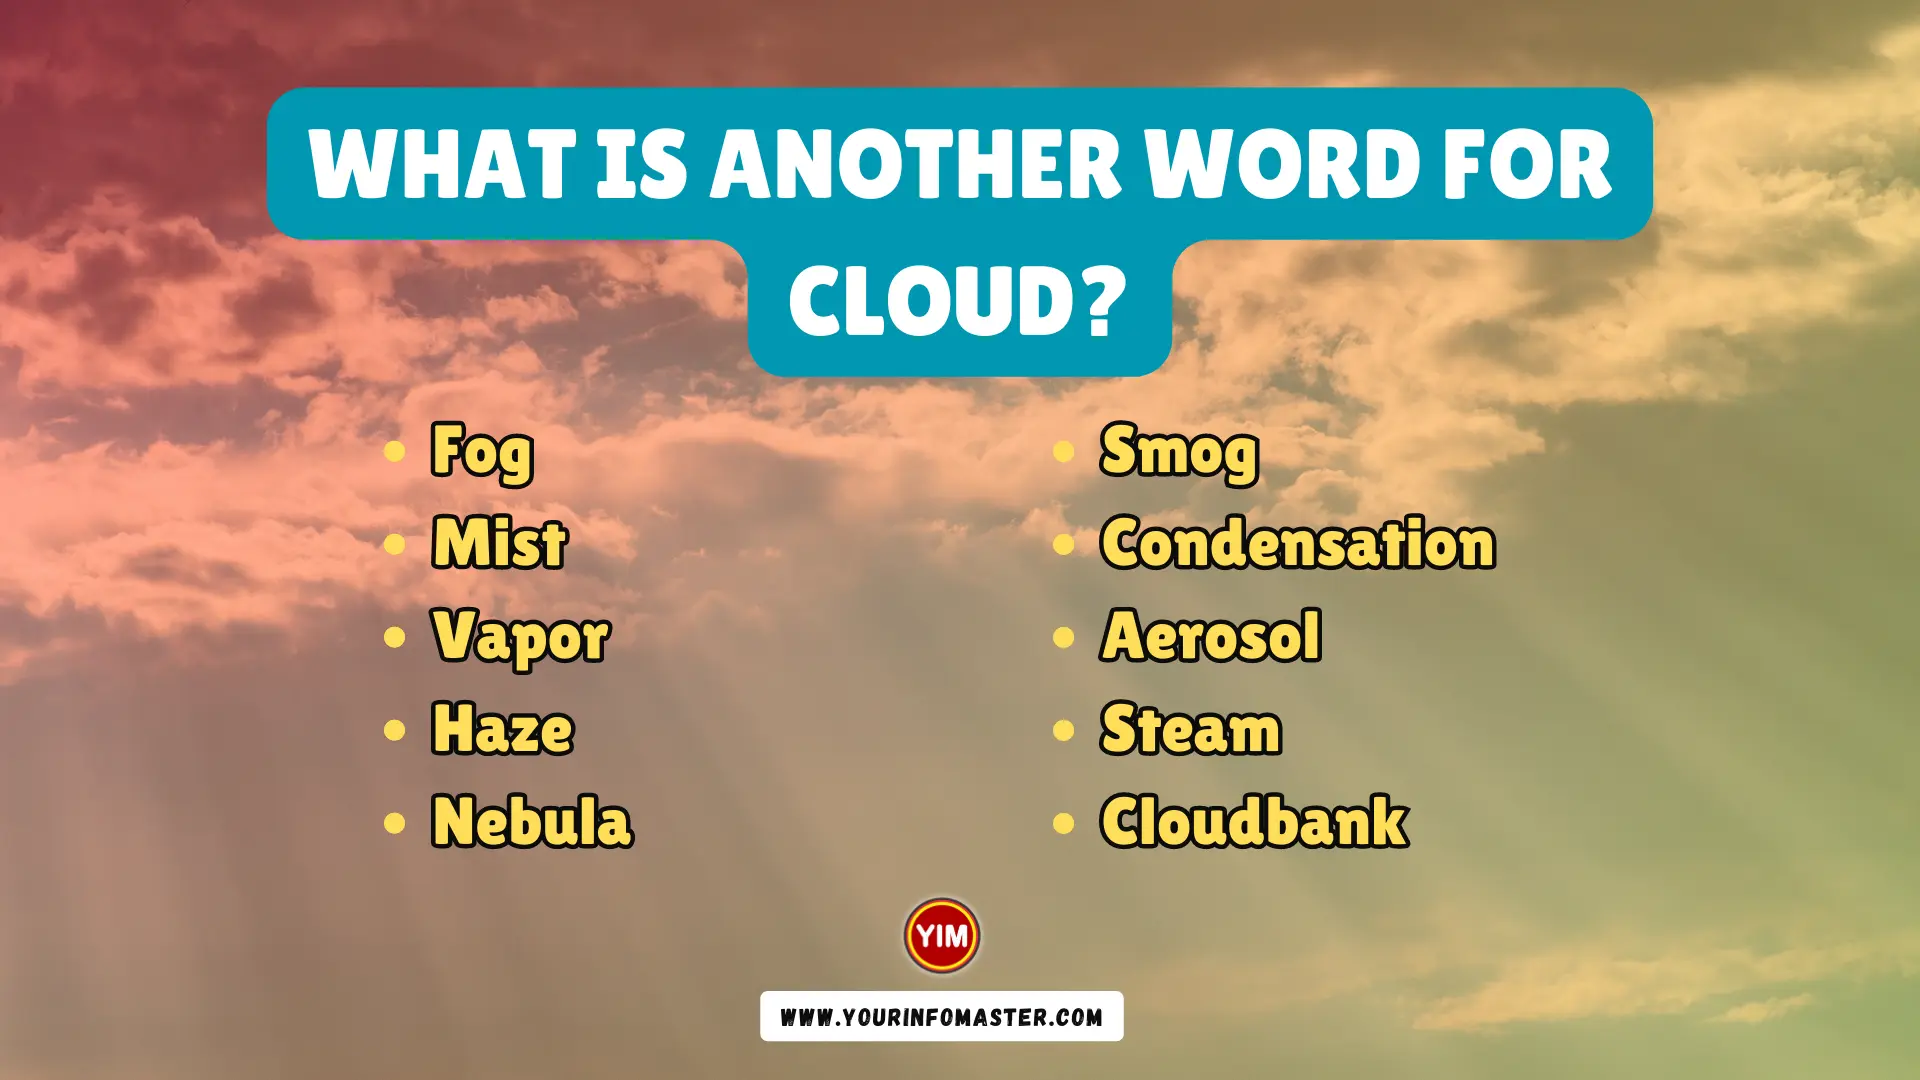 What is another word for Cloud